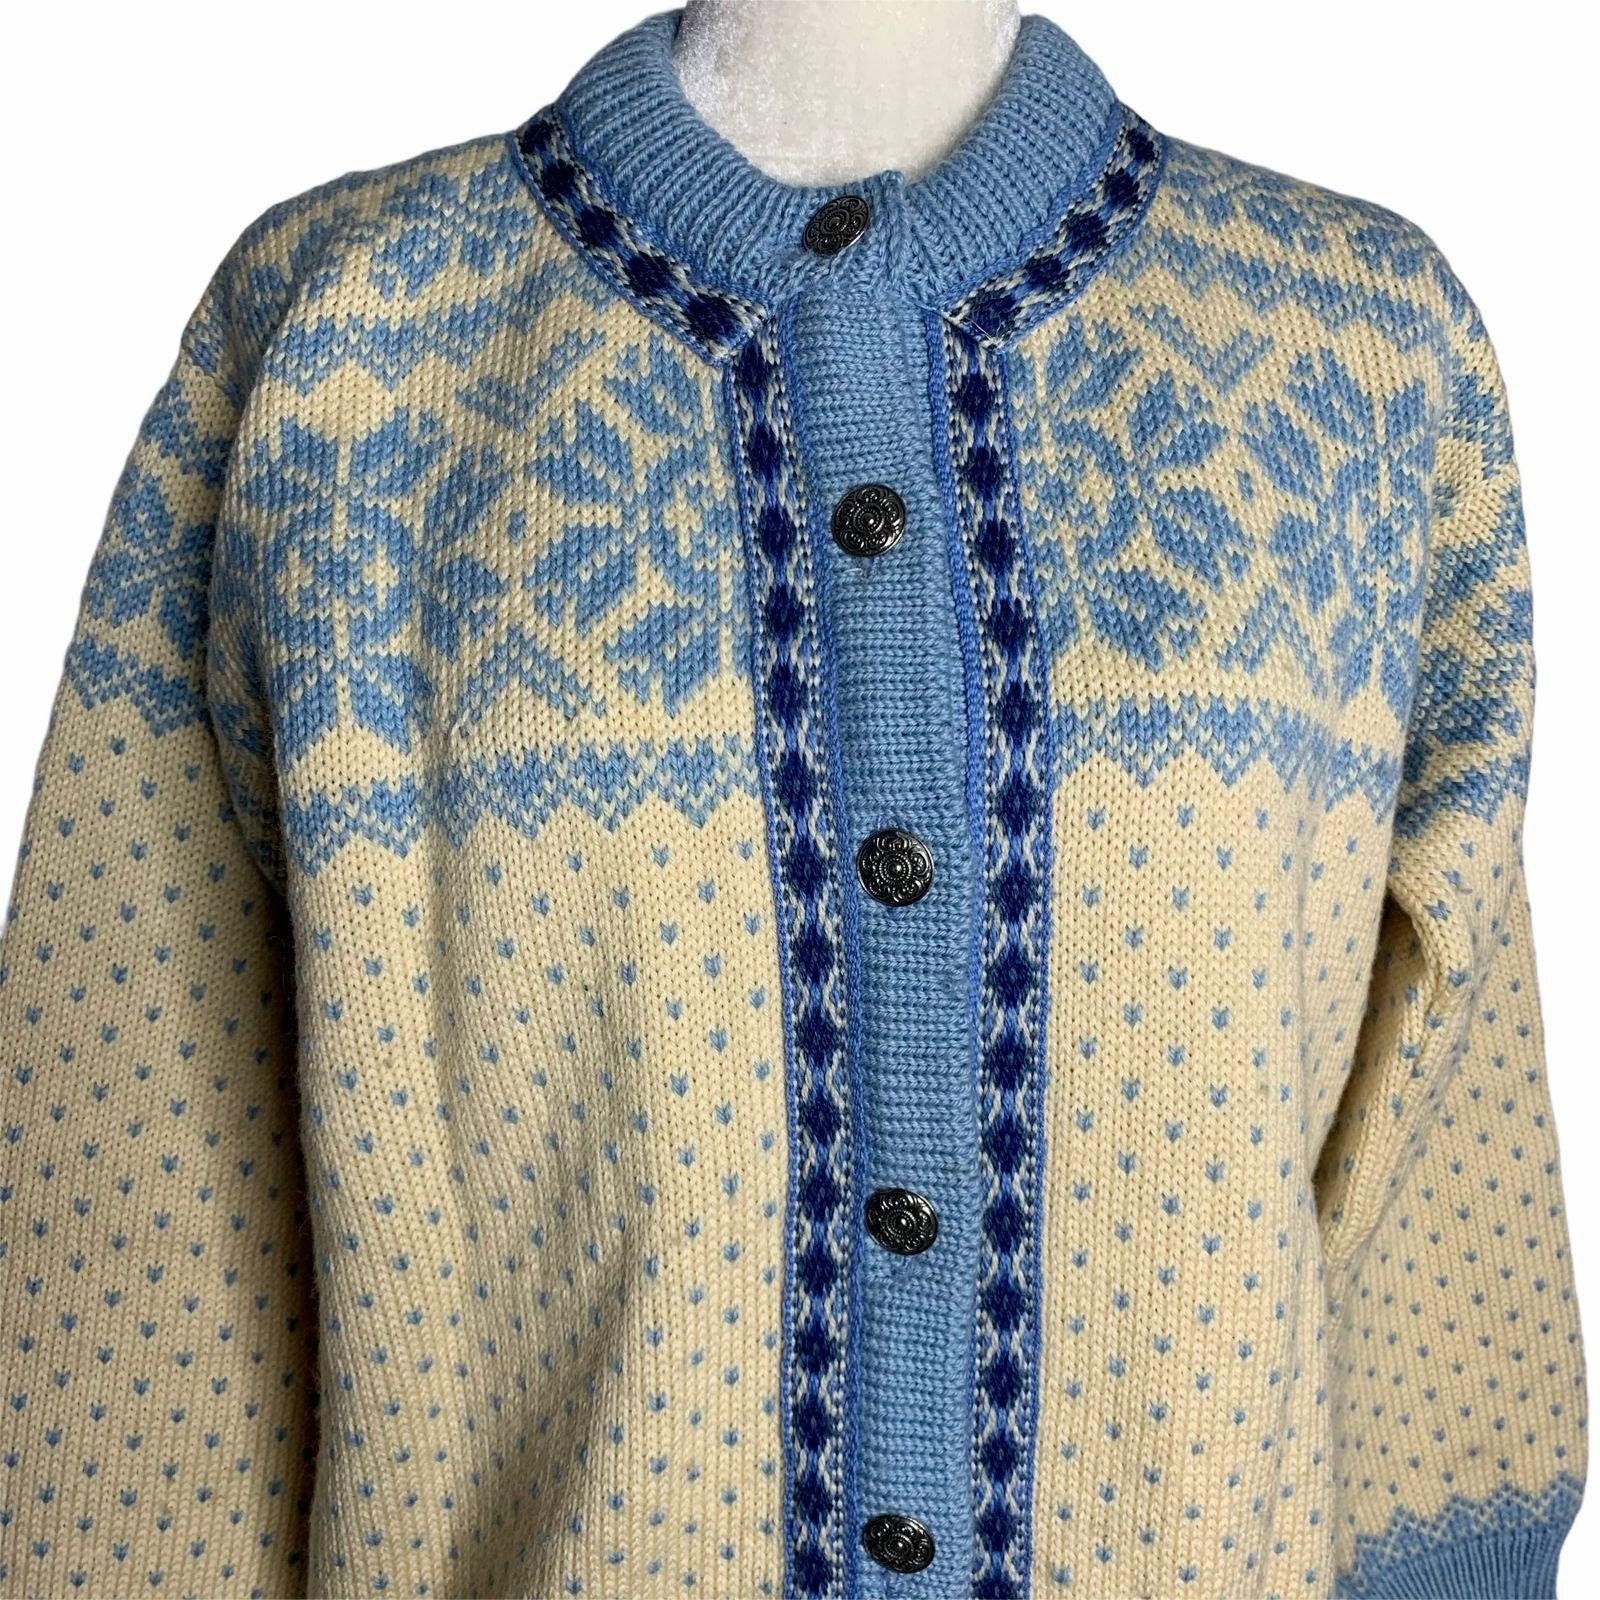 Vintage 60s Dale of Norway Cardigan Sweater XS Cream Knit Wool